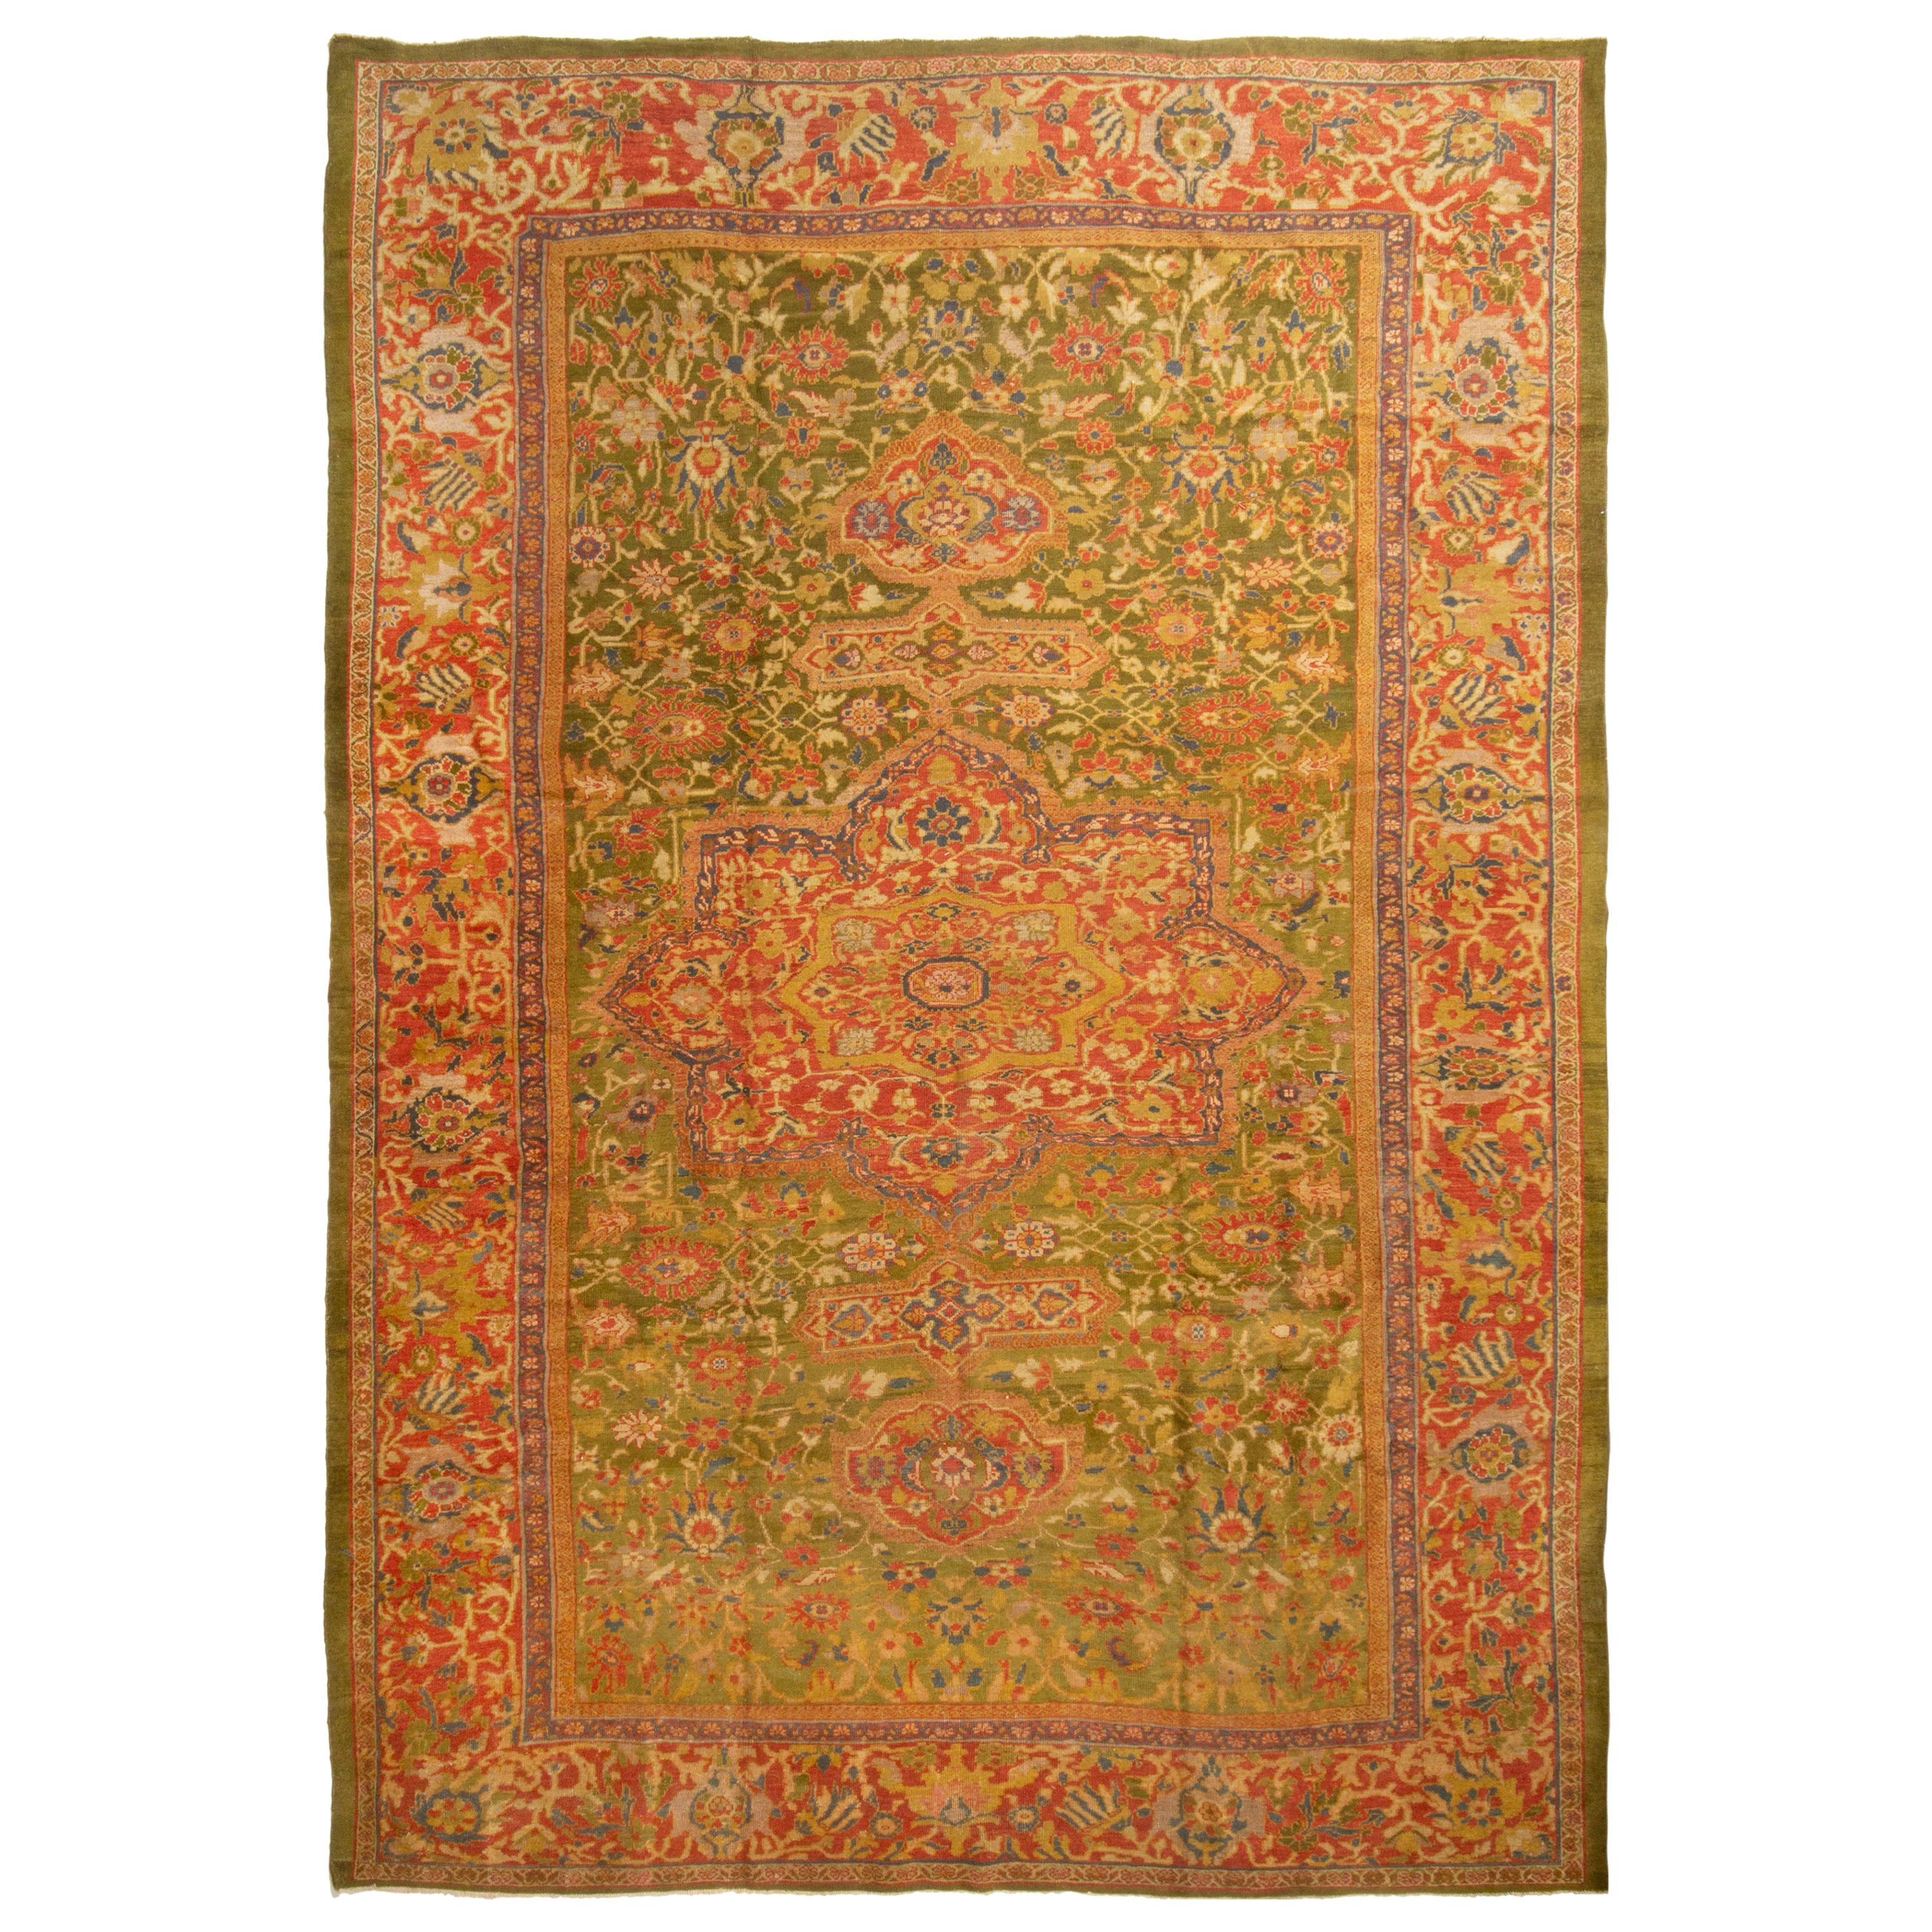 Antique Sultanabad Indian Red and Green Floral Rug